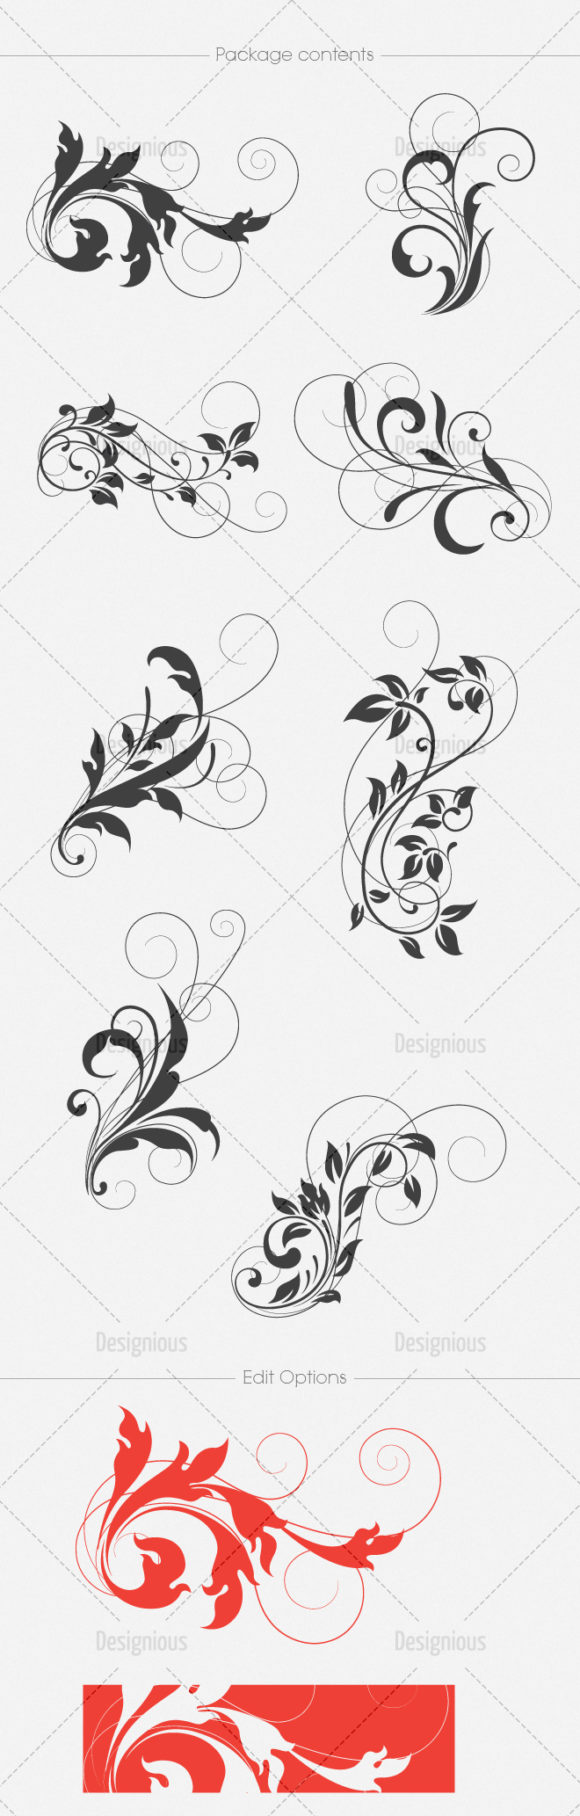 Floral Vector Pack 128 2